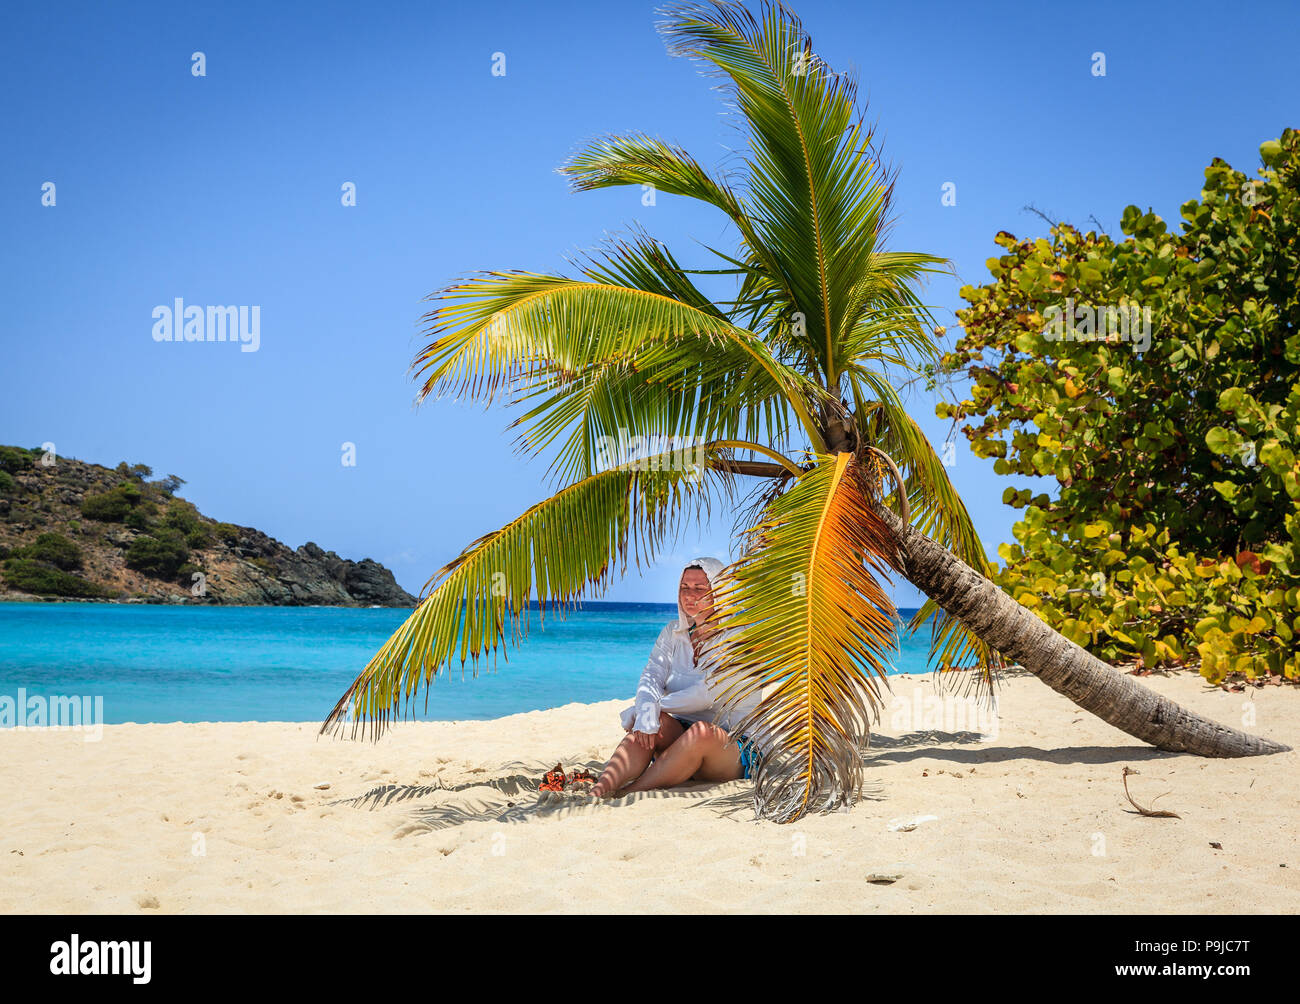 Woman is resting in shade of a palm tree on a beach in British Virgin Islands Stock Photo